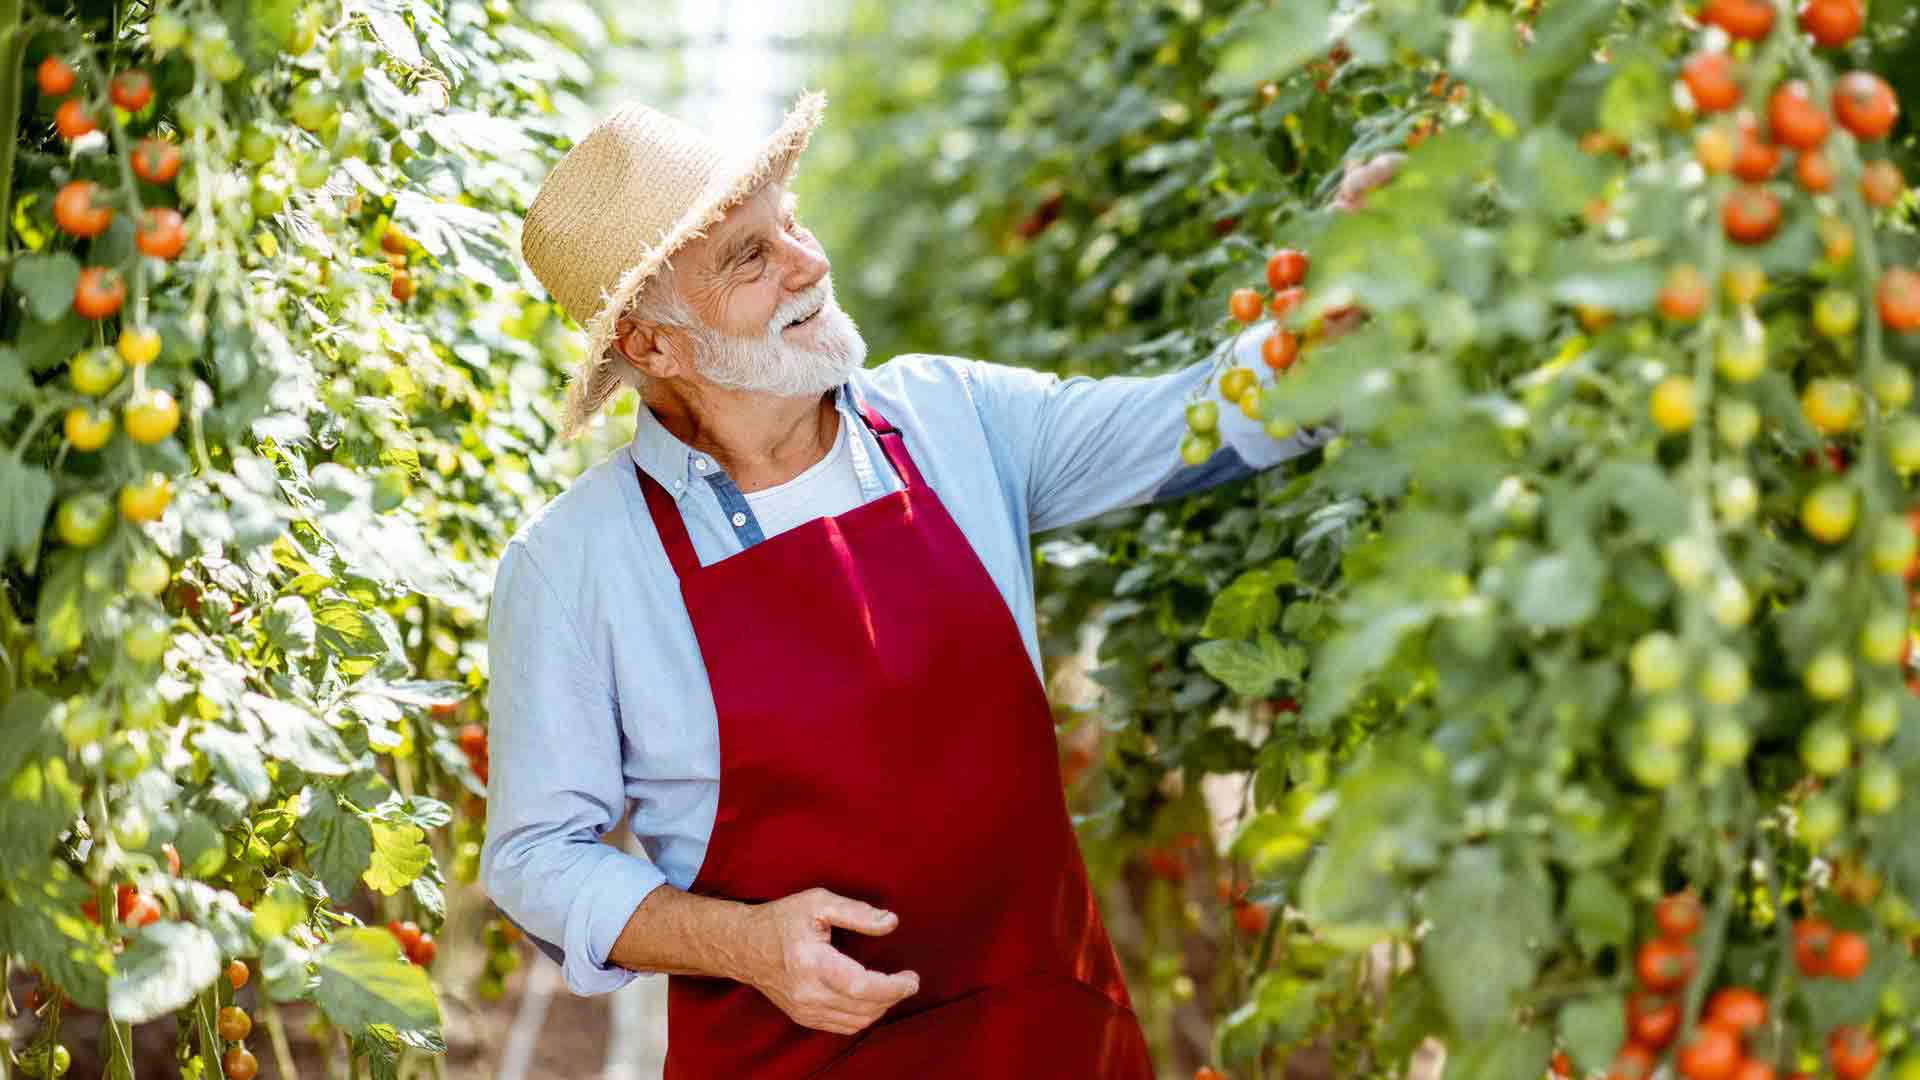 An elderly gentleman is in his farm wearing a red apron.